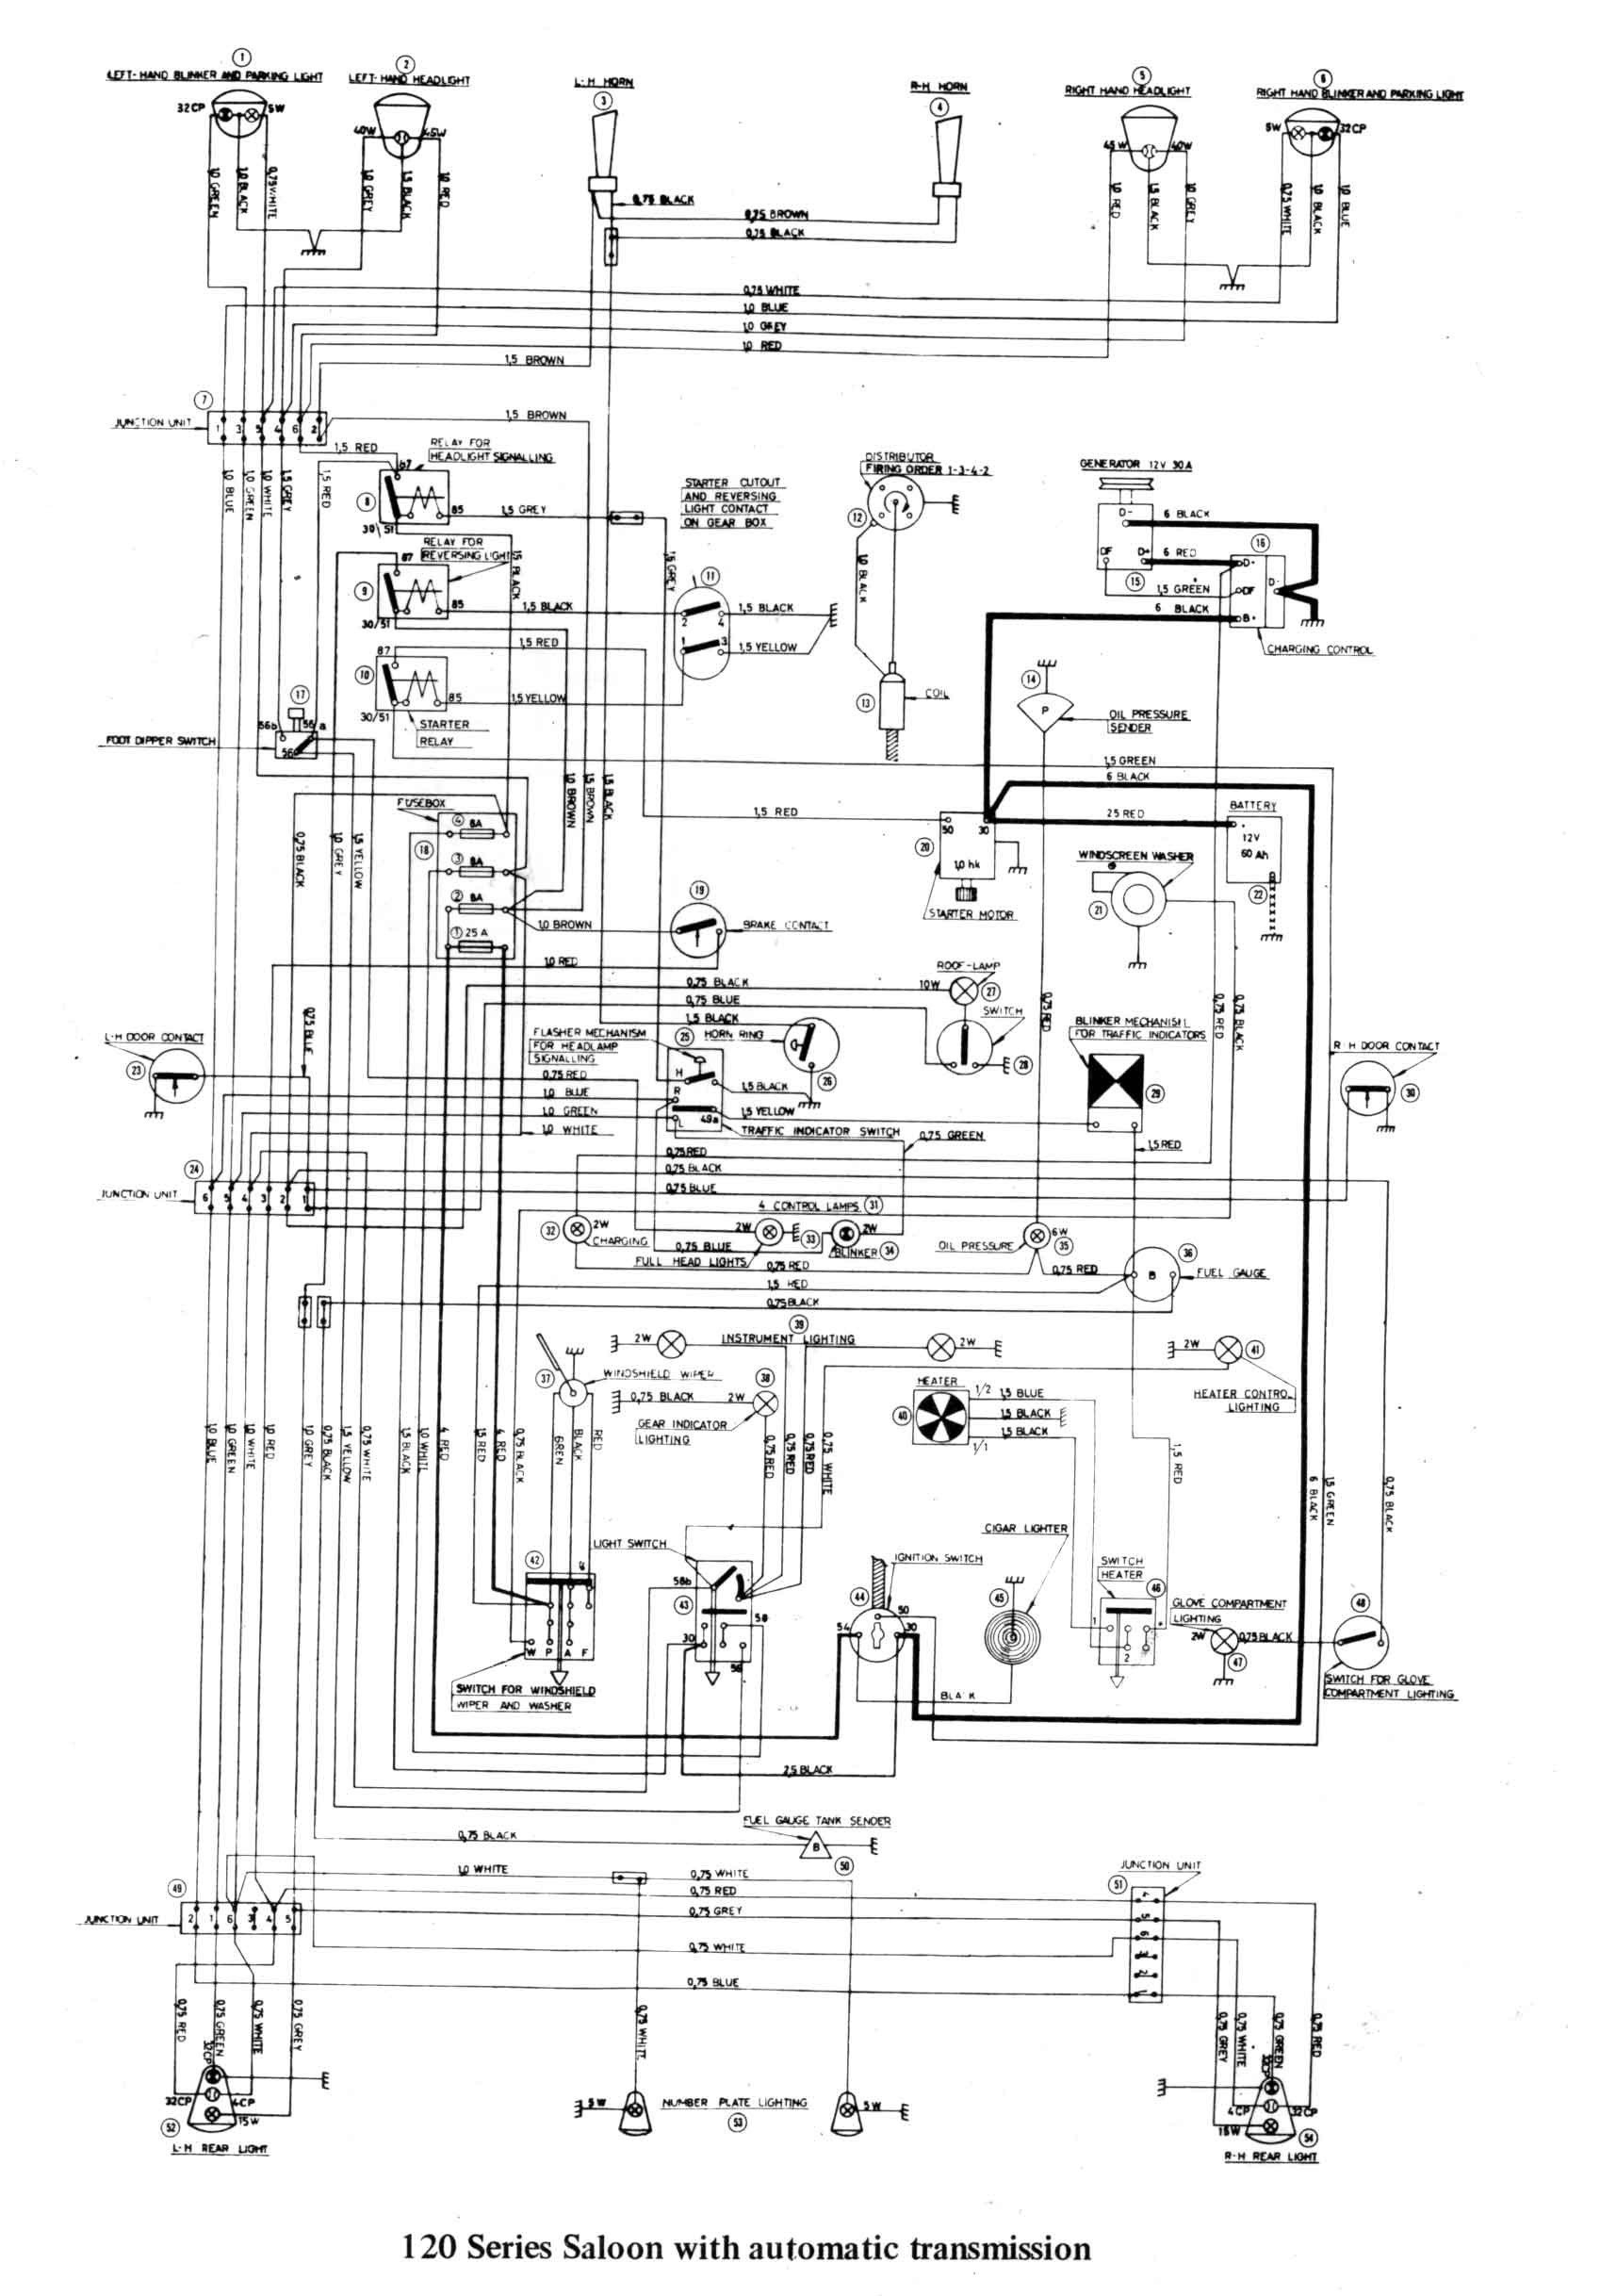 Turn Signal Wiring Schematic Diagram Awesome Turn Signal Wiring Diagram Of Turn Signal Wiring Schematic Diagram